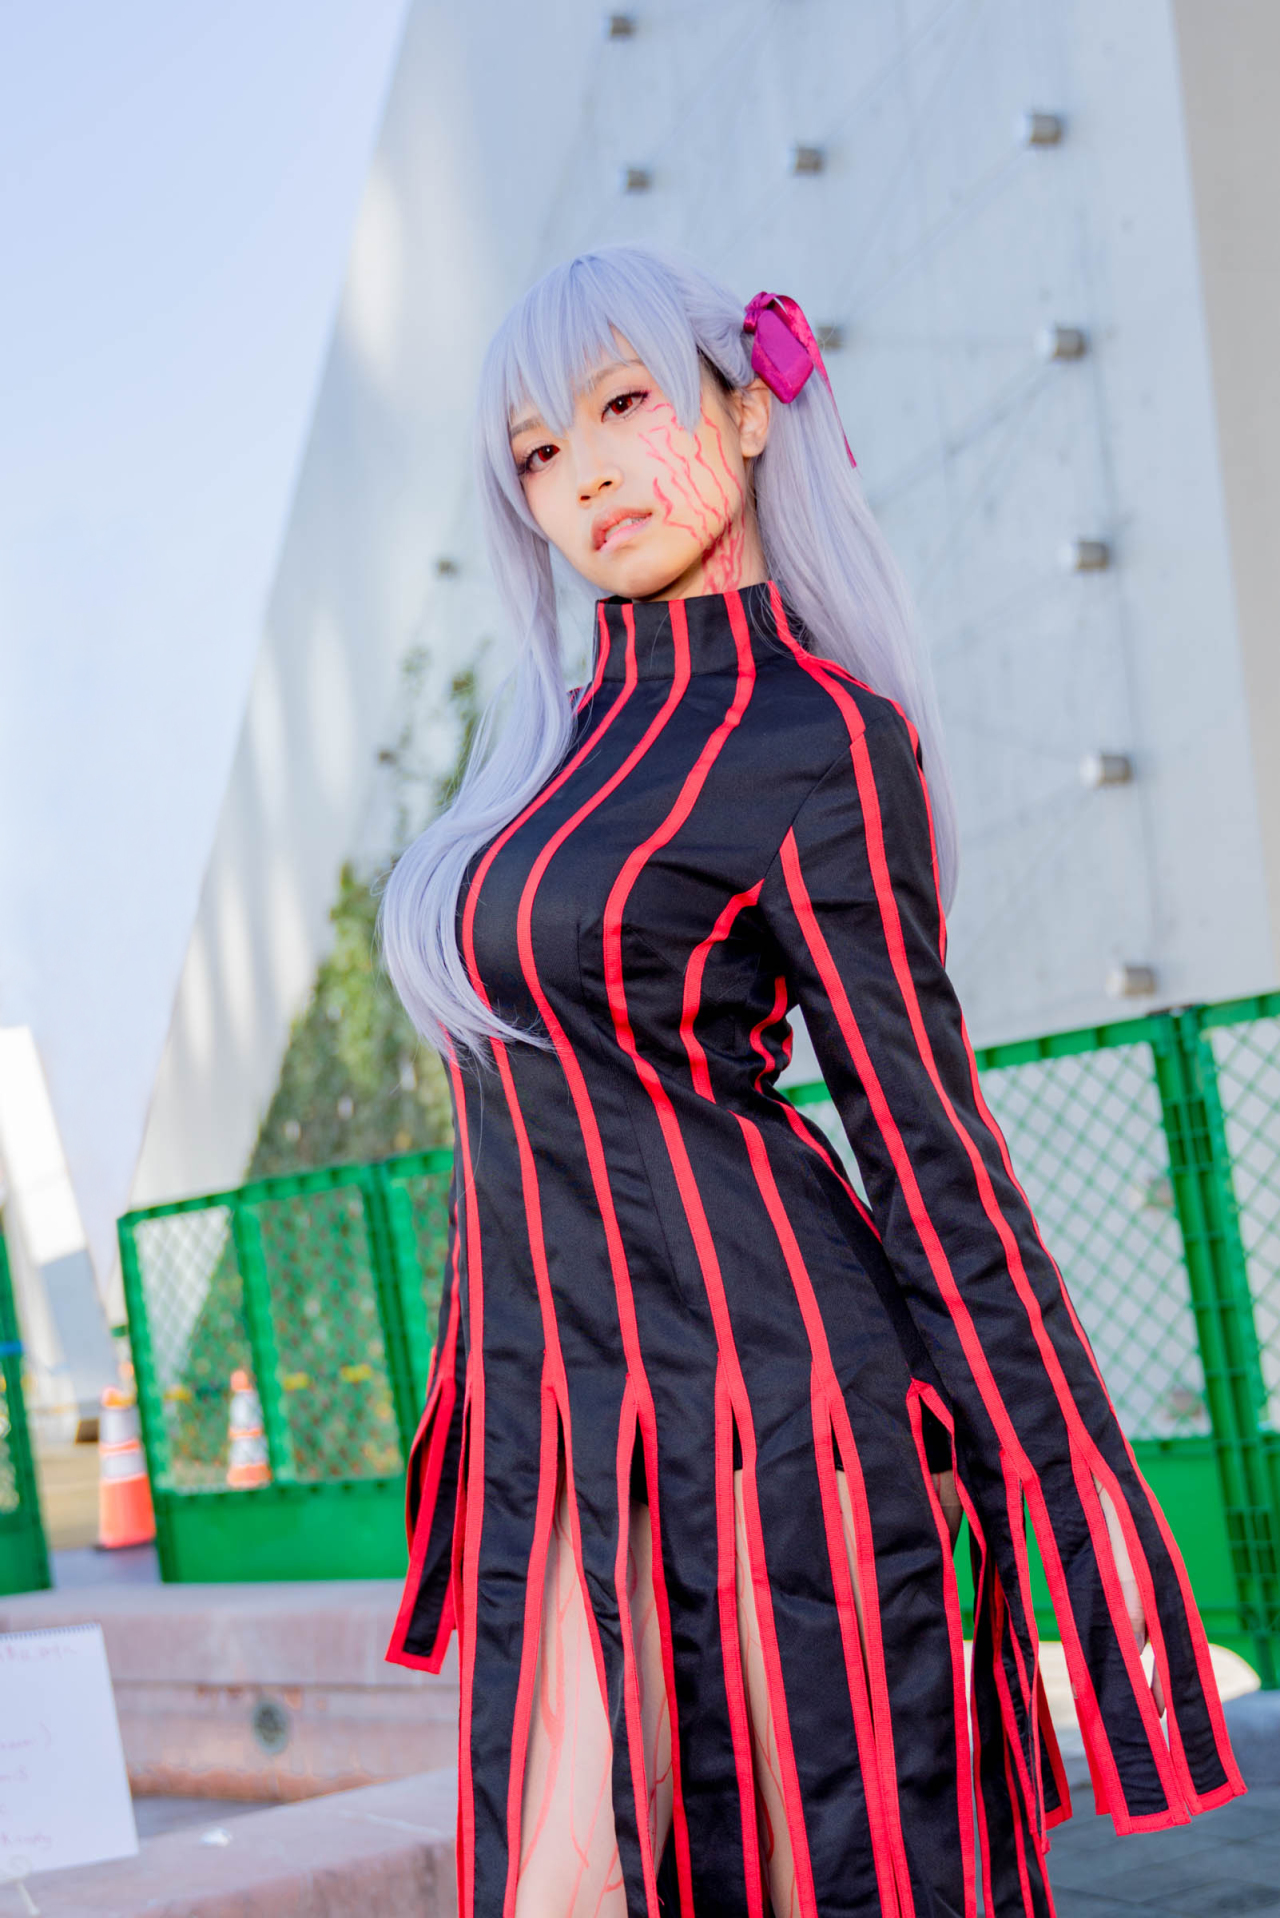 The Best Japanese Cosplayers From Day 4 Of Winter Comiket 2019【photos】 Soranews24 Japan News